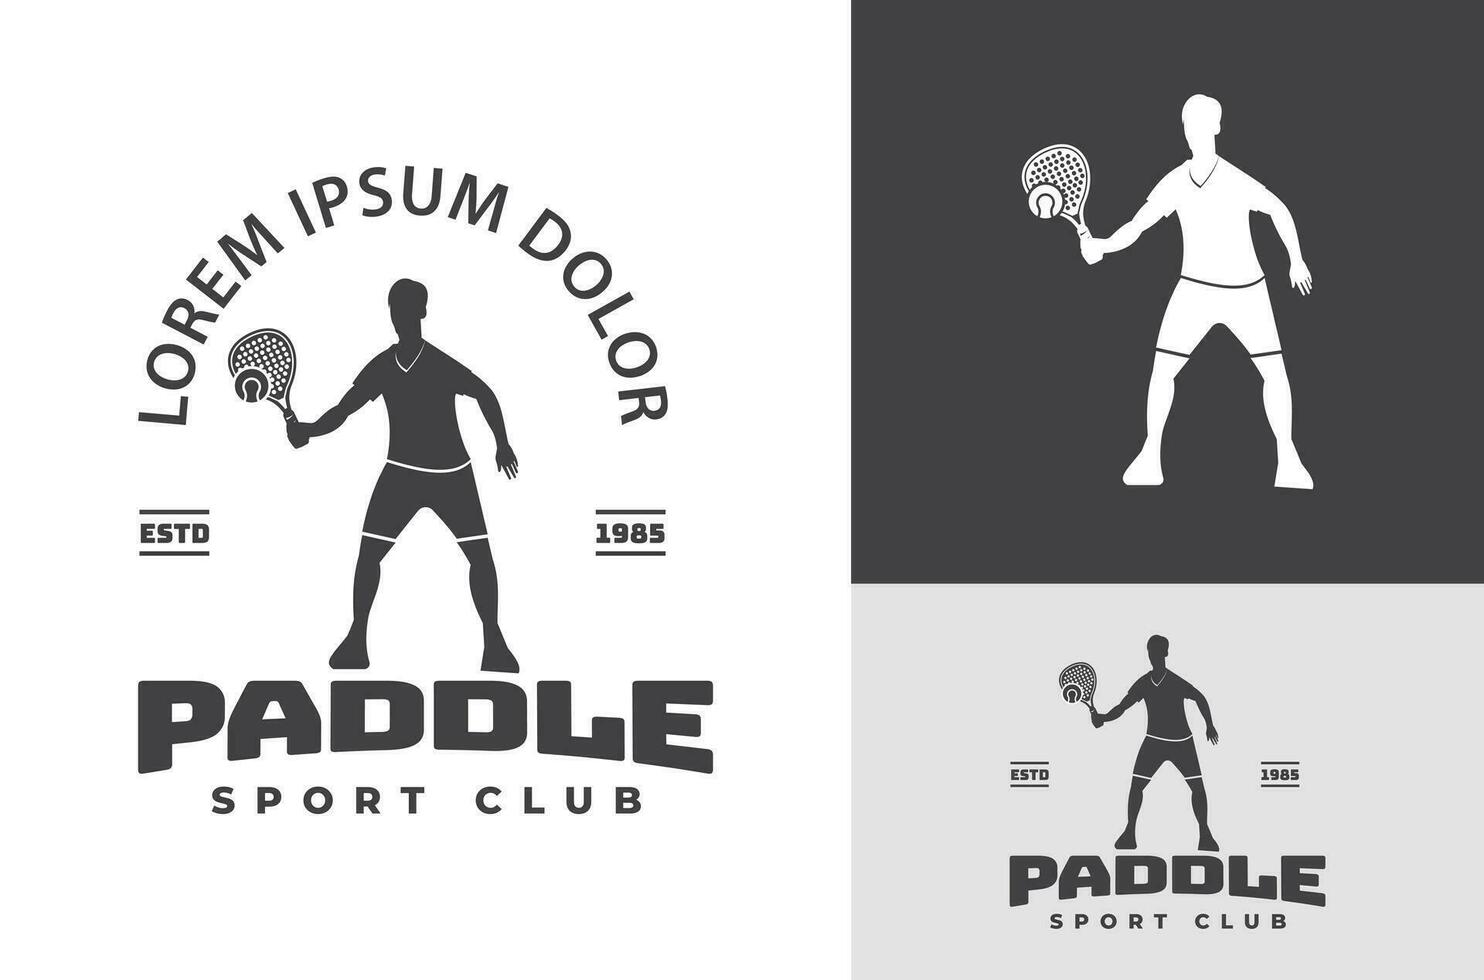 Paddle Tennis Club Badge Emblem Vintage Retro Vector Illustration with Tennis Paddle Player Silhouette